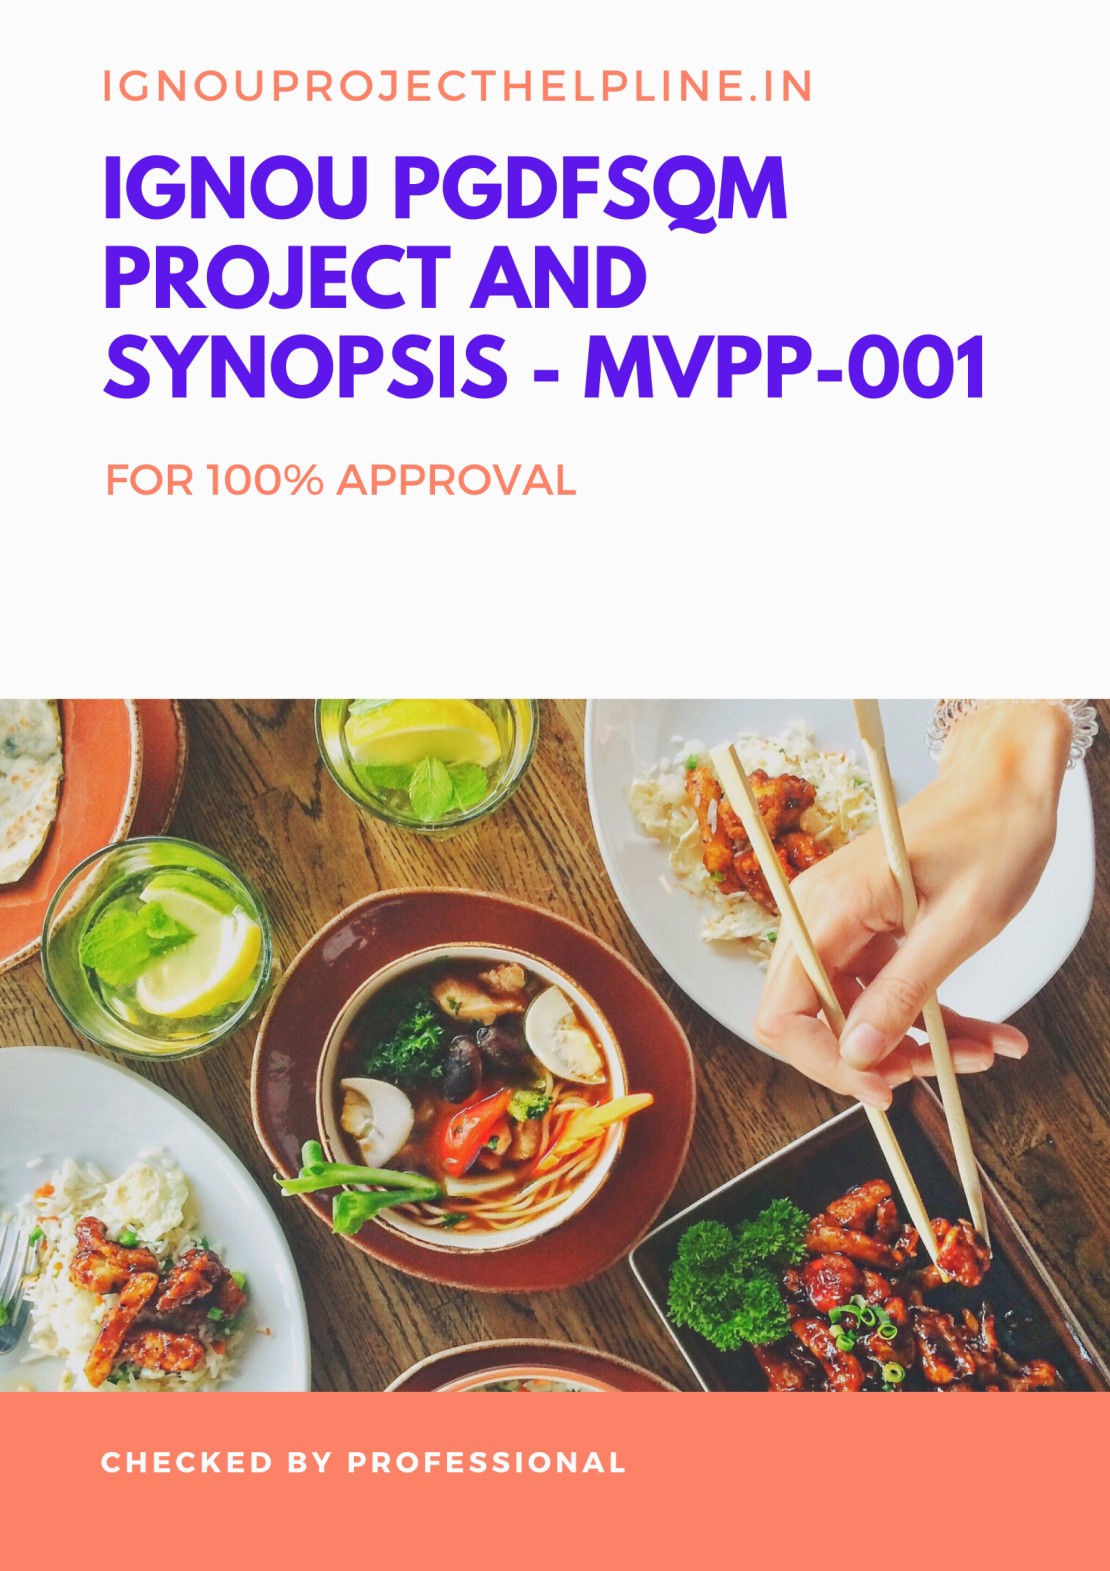 IGNOU PGDFSQM PROJECT AND SYNOPSIS - MVPP-001